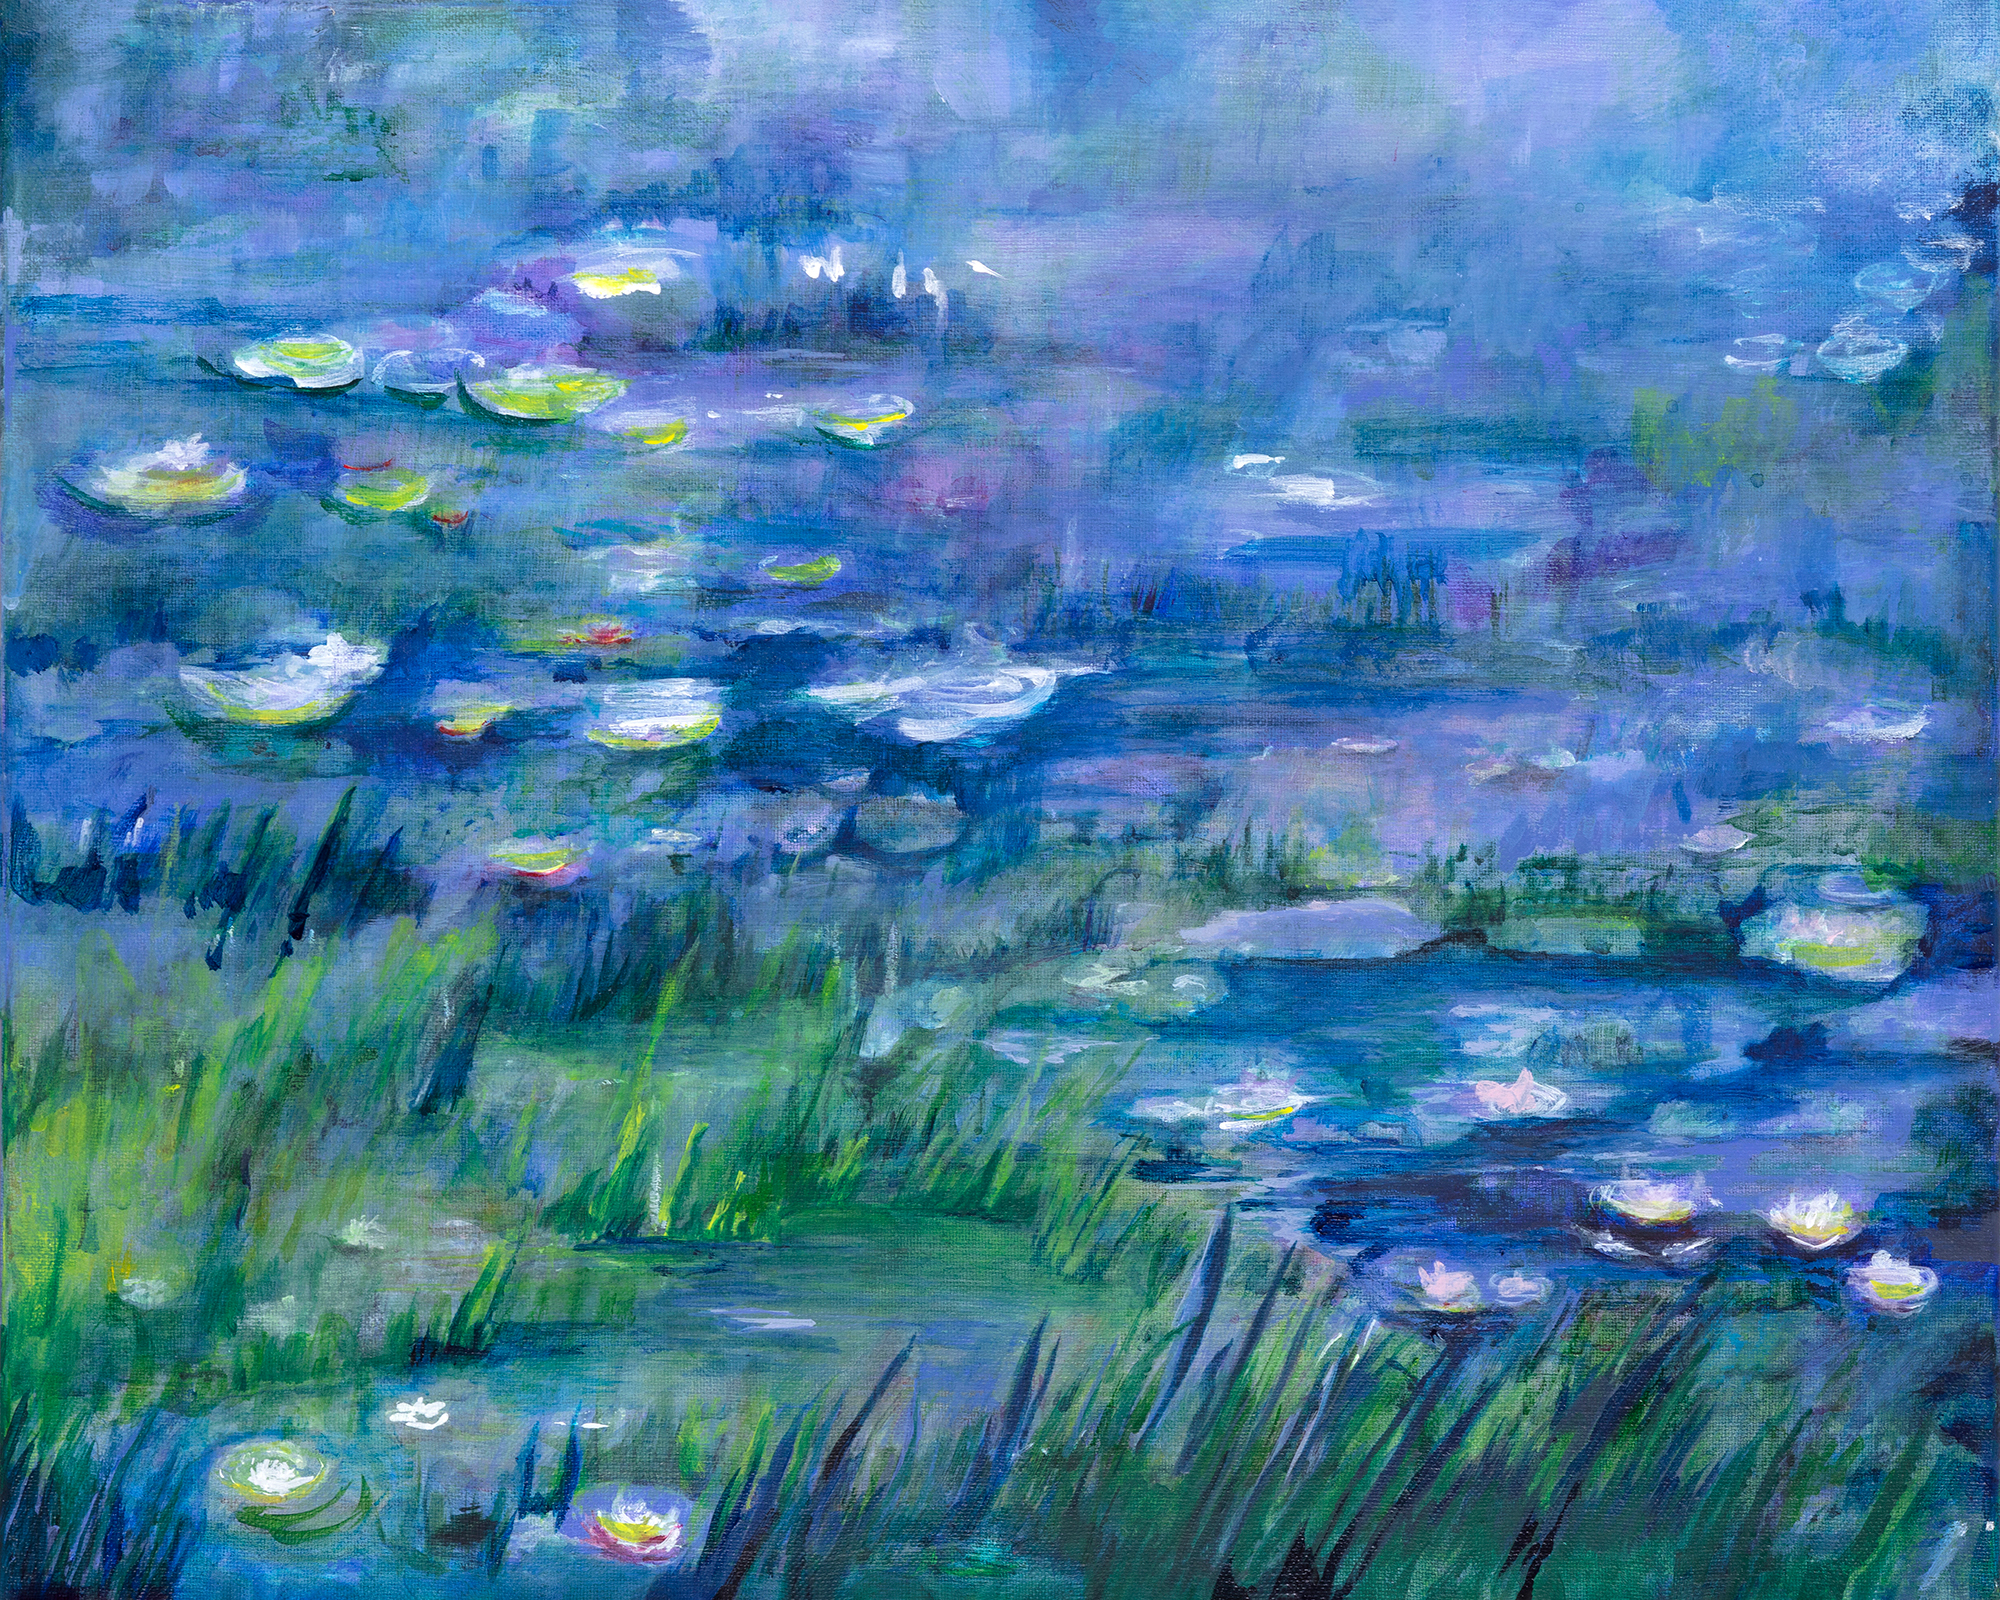 Monet second look at lilies i5httt